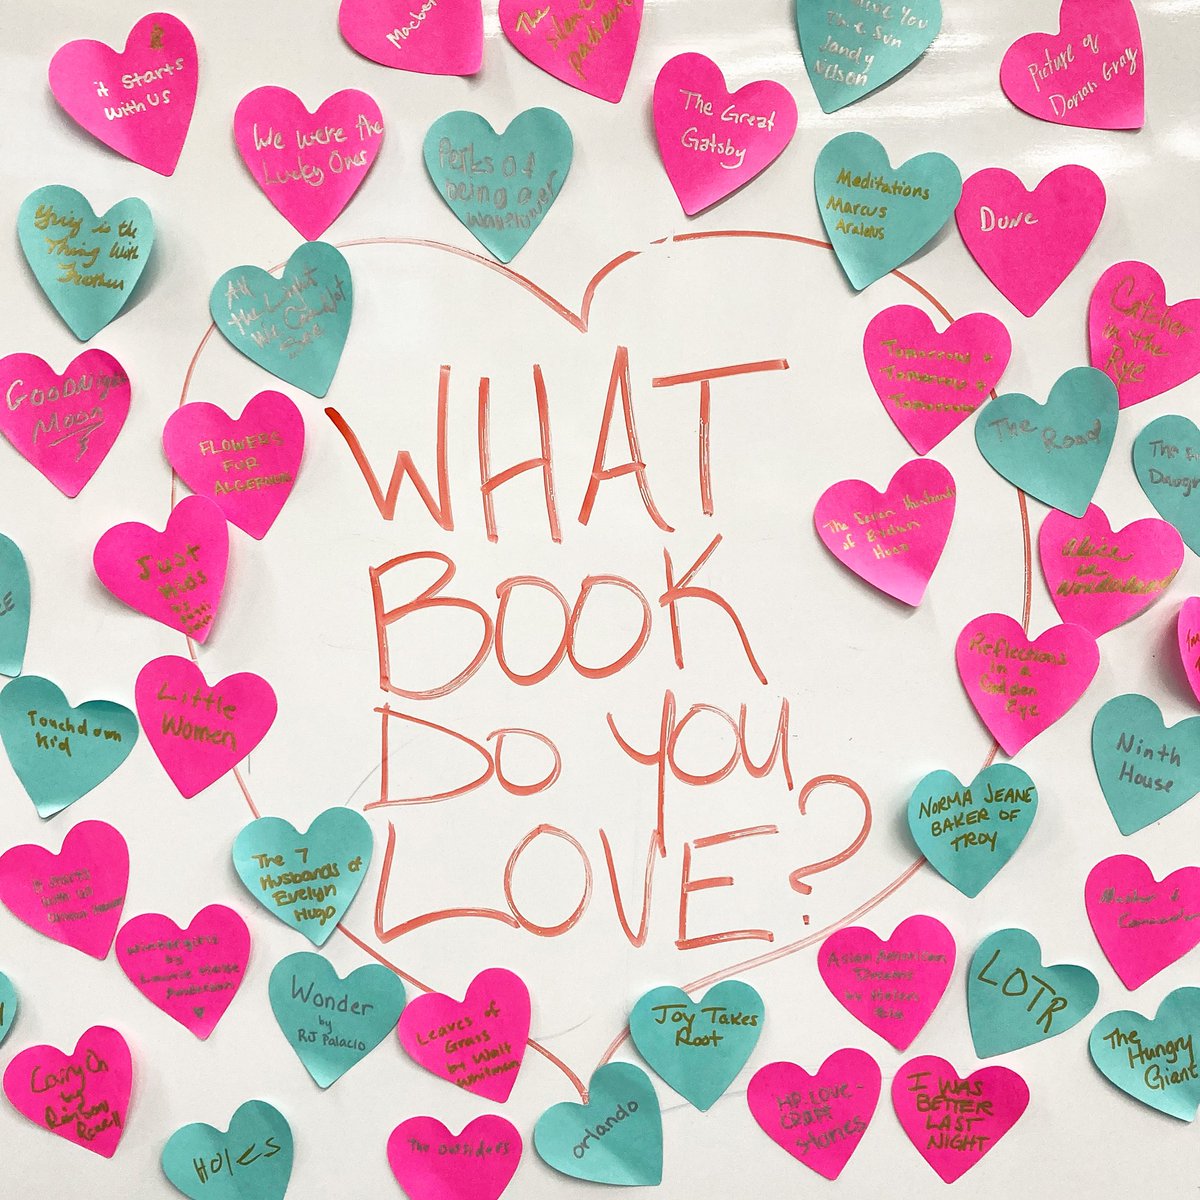 Happy Valentine’s Day to all you book lovers out there! 📚💕 #happyvalentinesday #valentinesday #stvalentinesday #book #books #booklovers #lovereading #librarylove